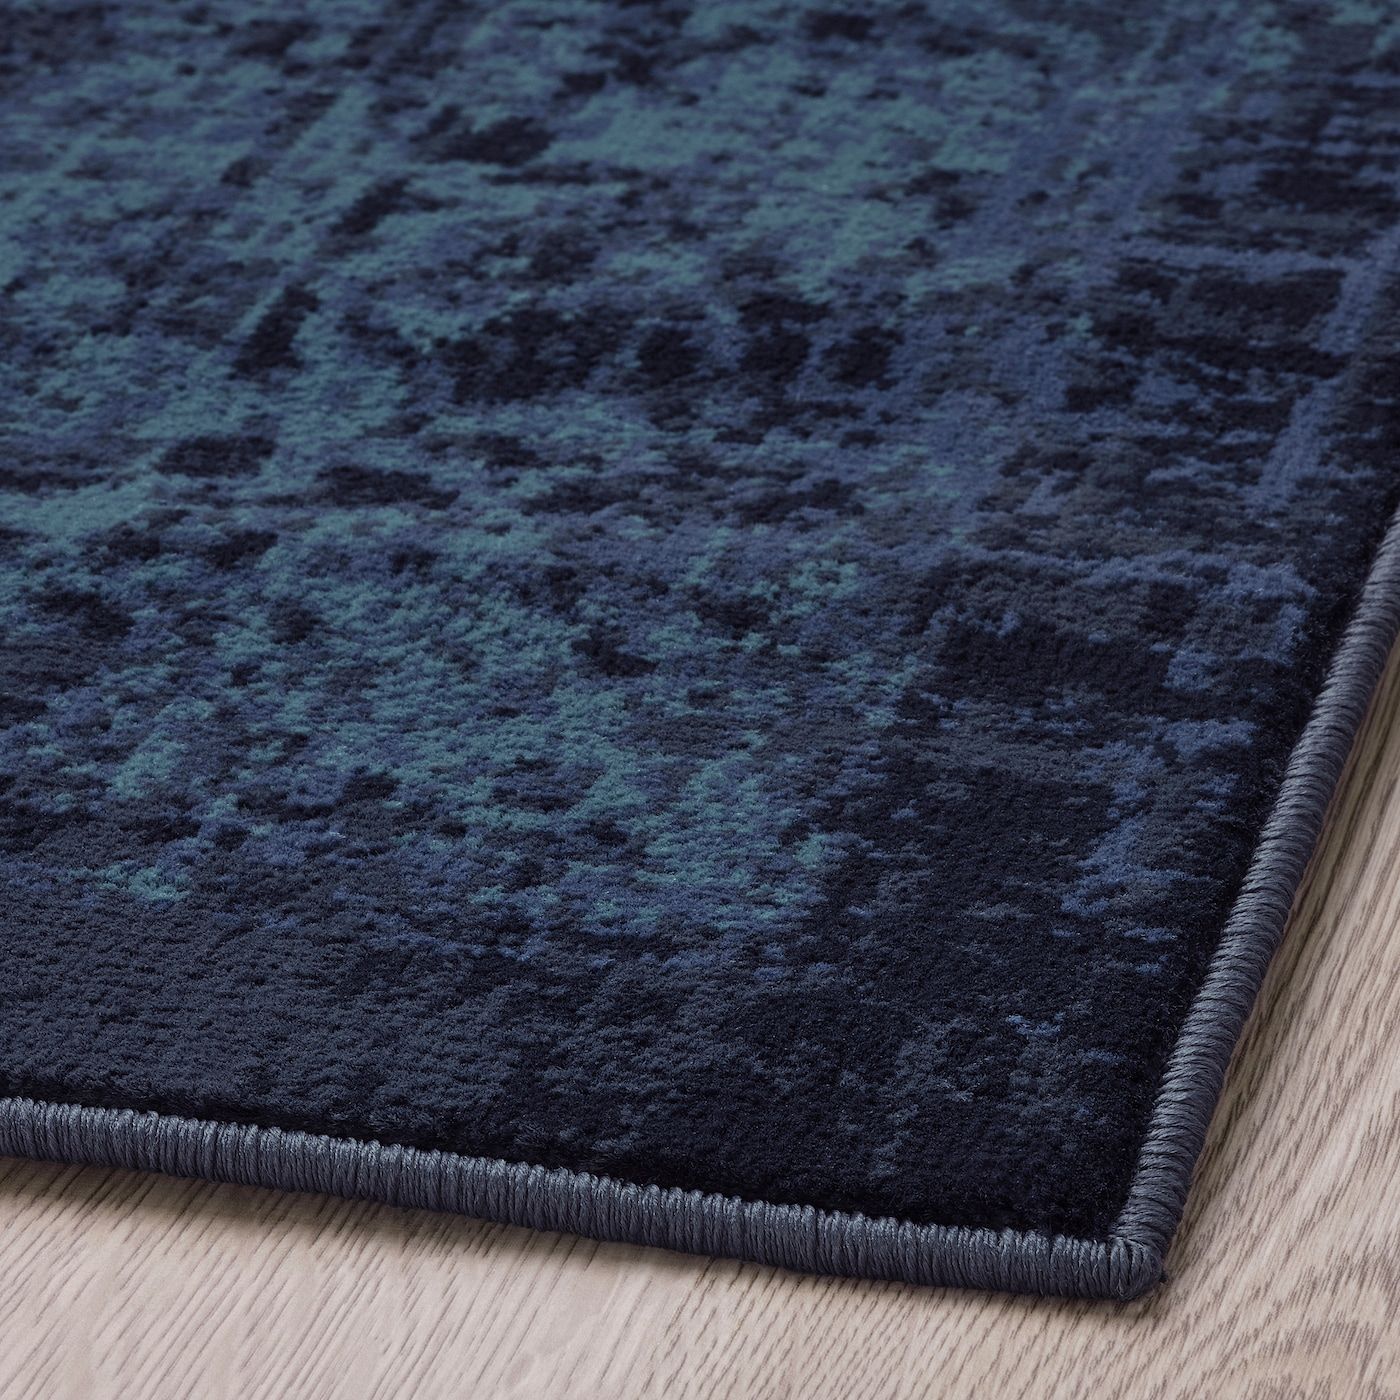 Vonsbäk Rug, Low Pile, Dark Blue, 4'4"X6'5" – Ikea For Blue Rugs (View 11 of 15)